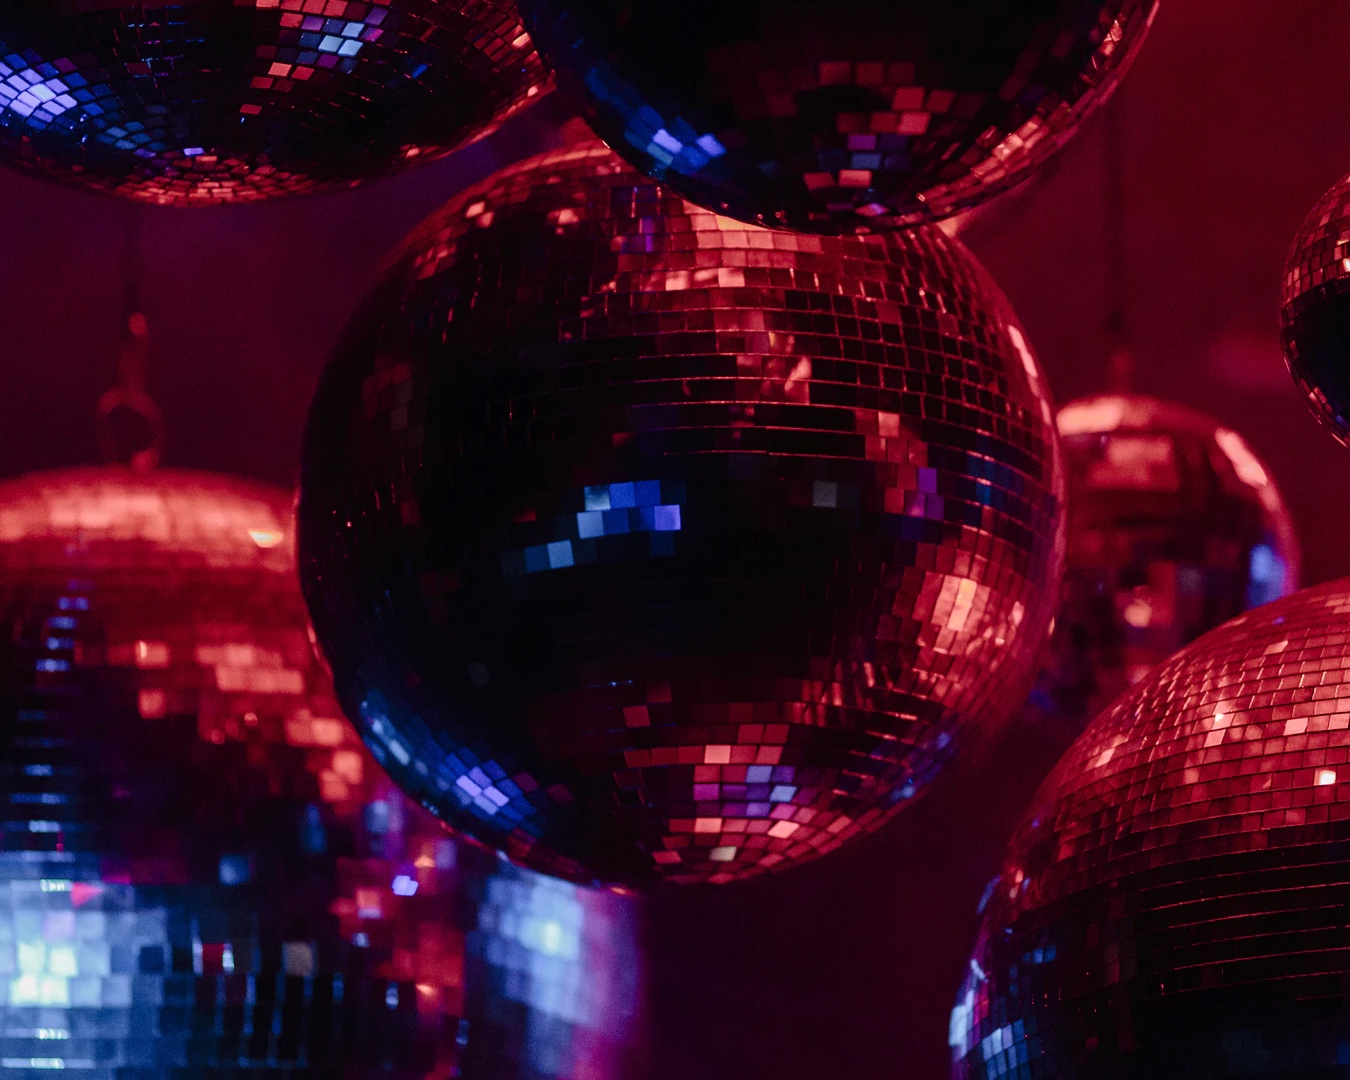 A collection of disco balls lit in red and purple lights. 